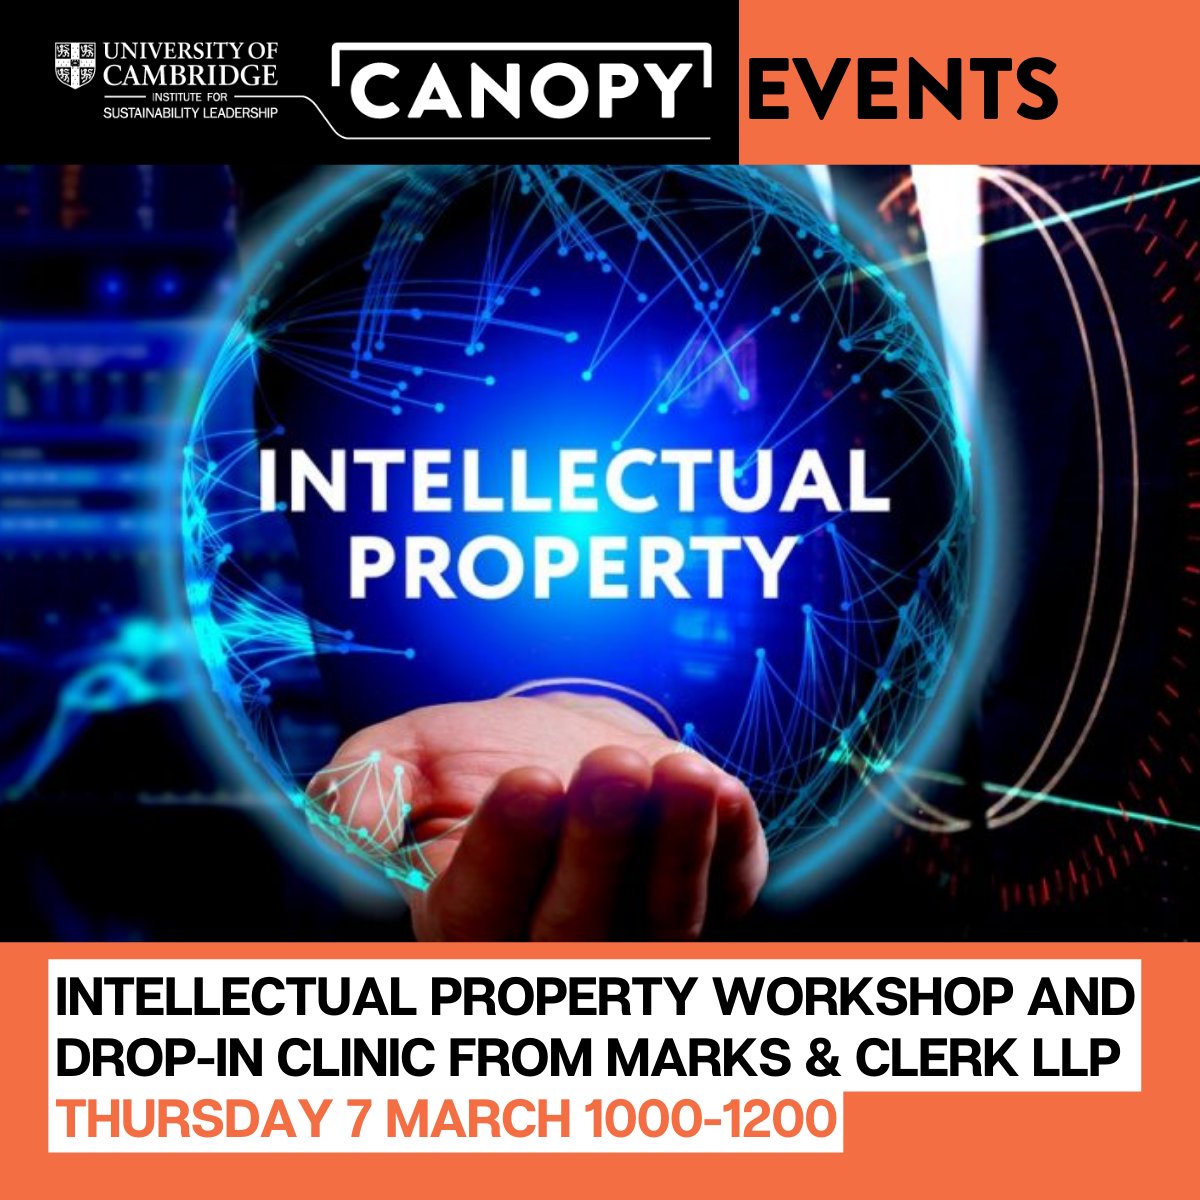 ⏰Time is running out! Join us for the Intellectual Property Workshop and Drop-in Clinic by @marksandclerk 🤓 Gain valuable insights into IP protection and patents from Matt Pinney, a leading patent attorney. 📅 Thurs 7 March ✏️Register now ➡️ bit.ly/IPWorkshopandC…